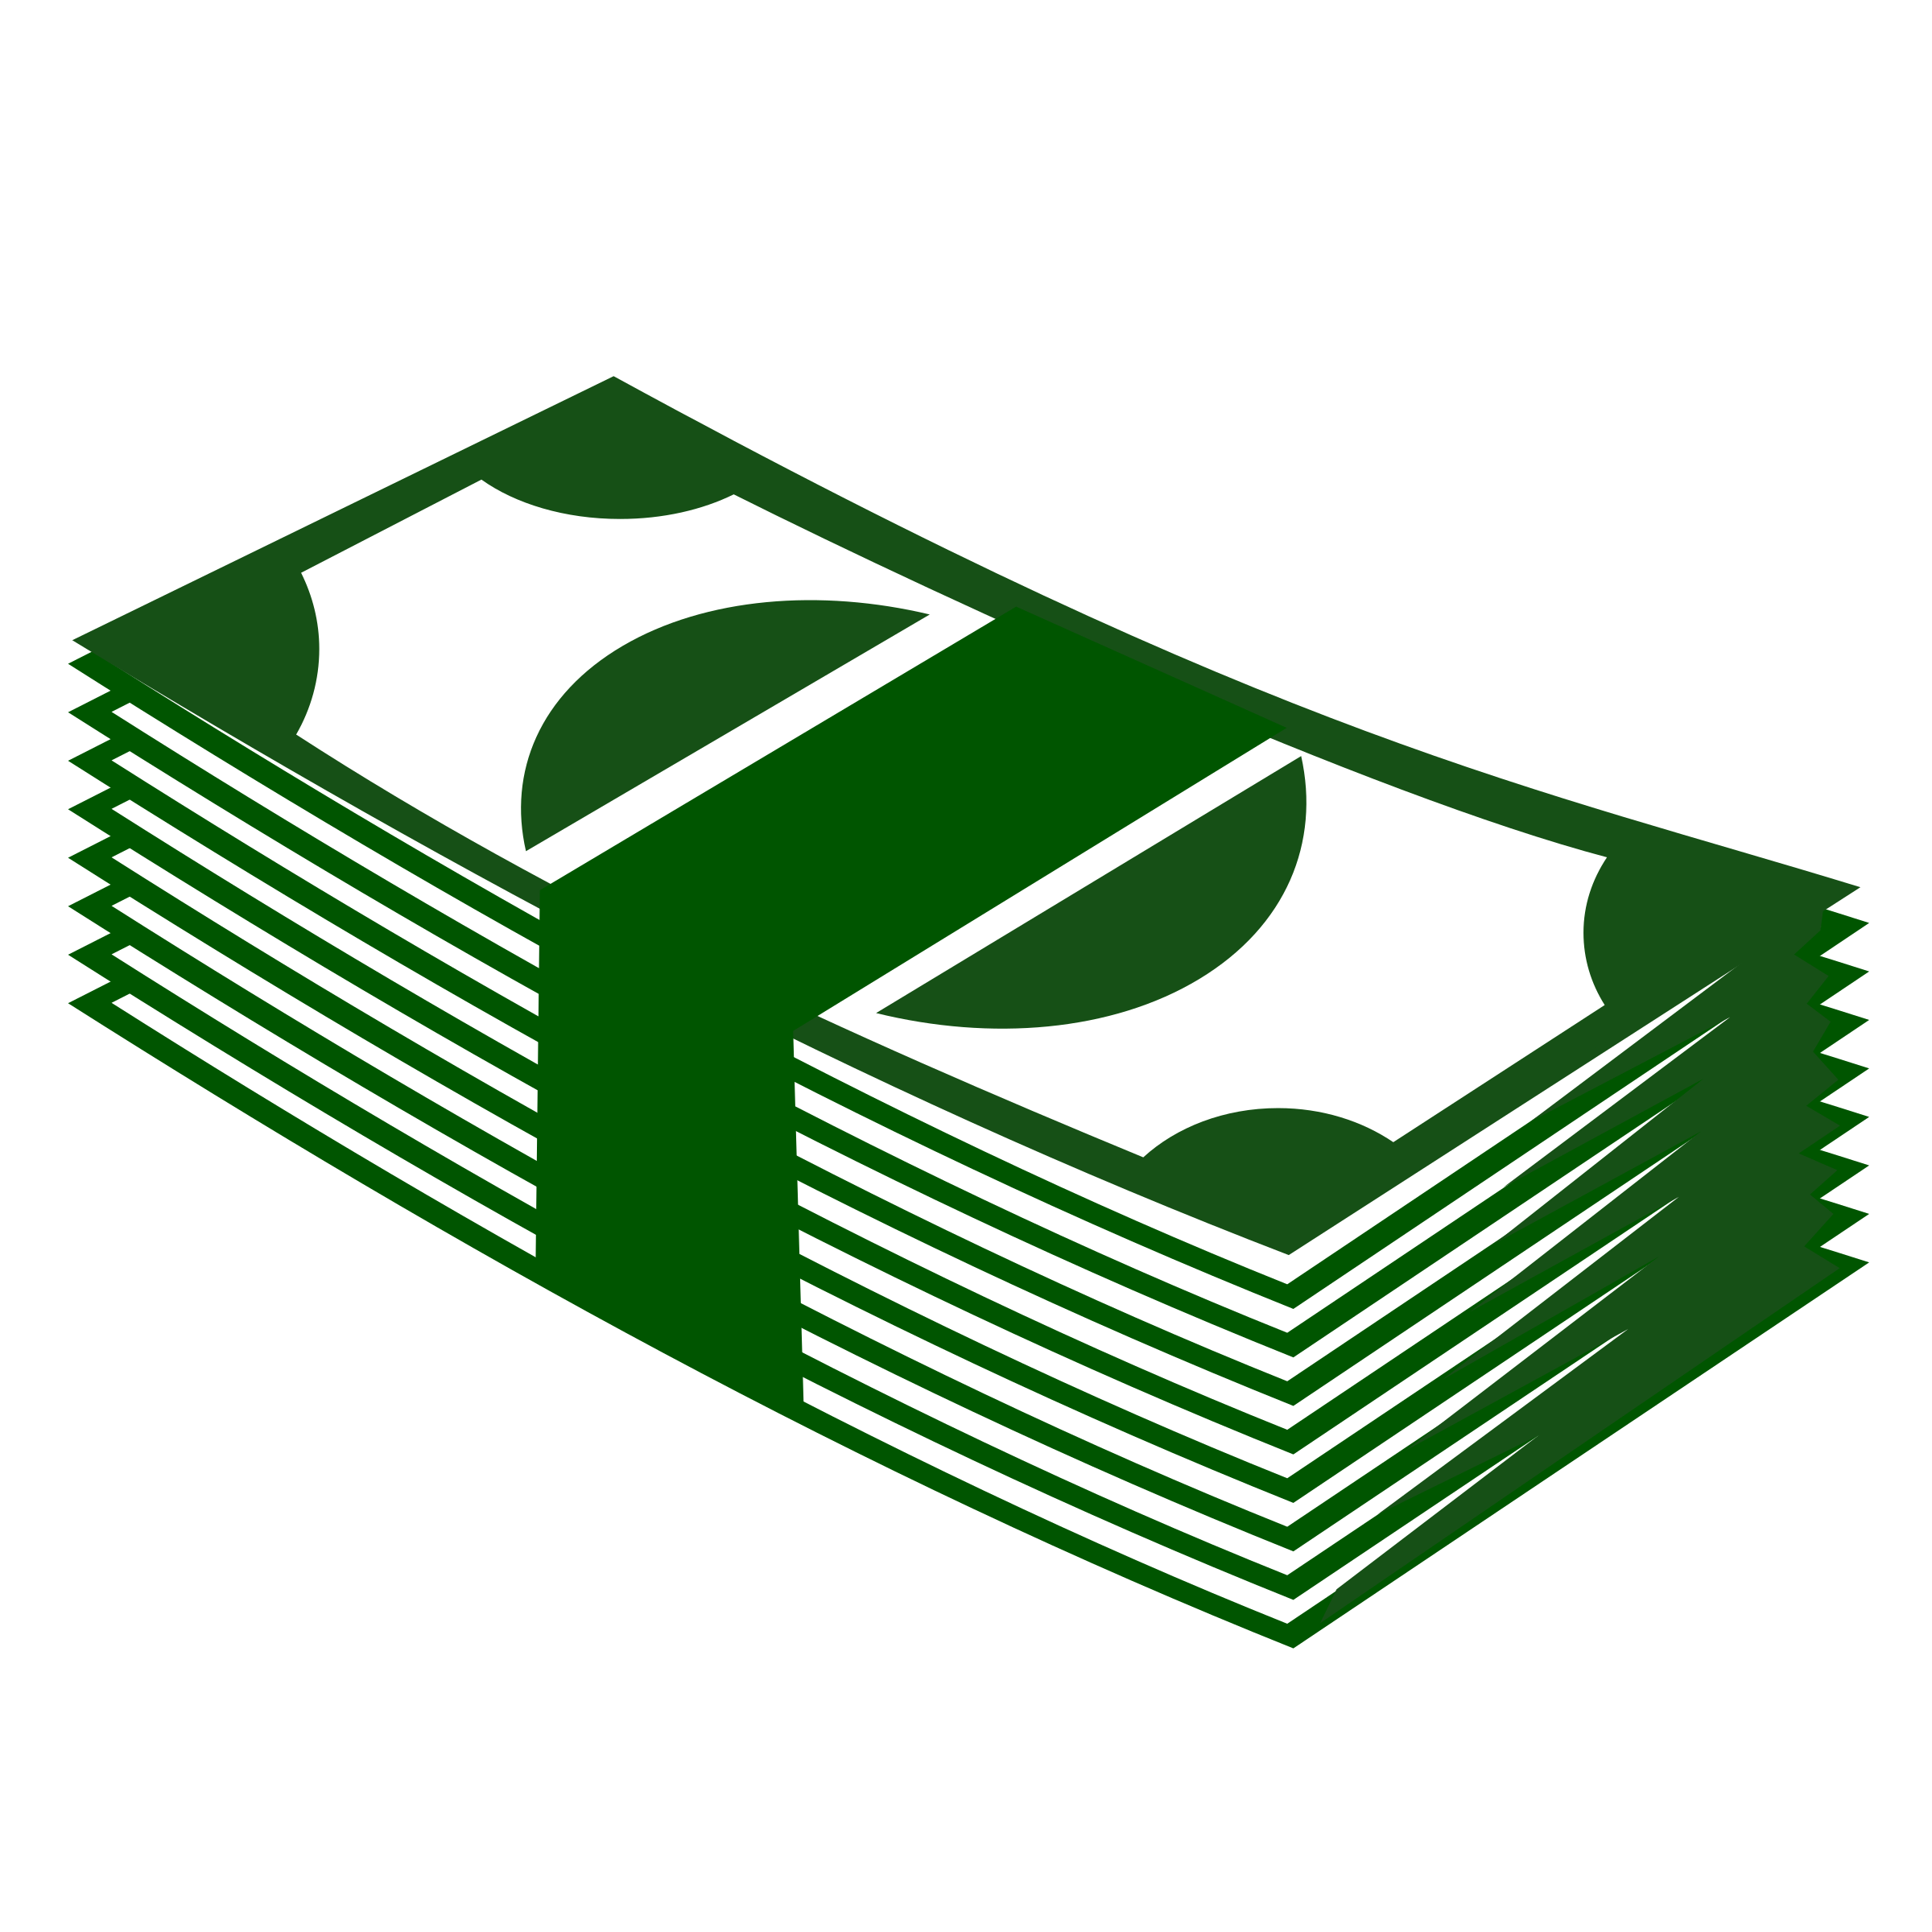 stack of money clipart - photo #10